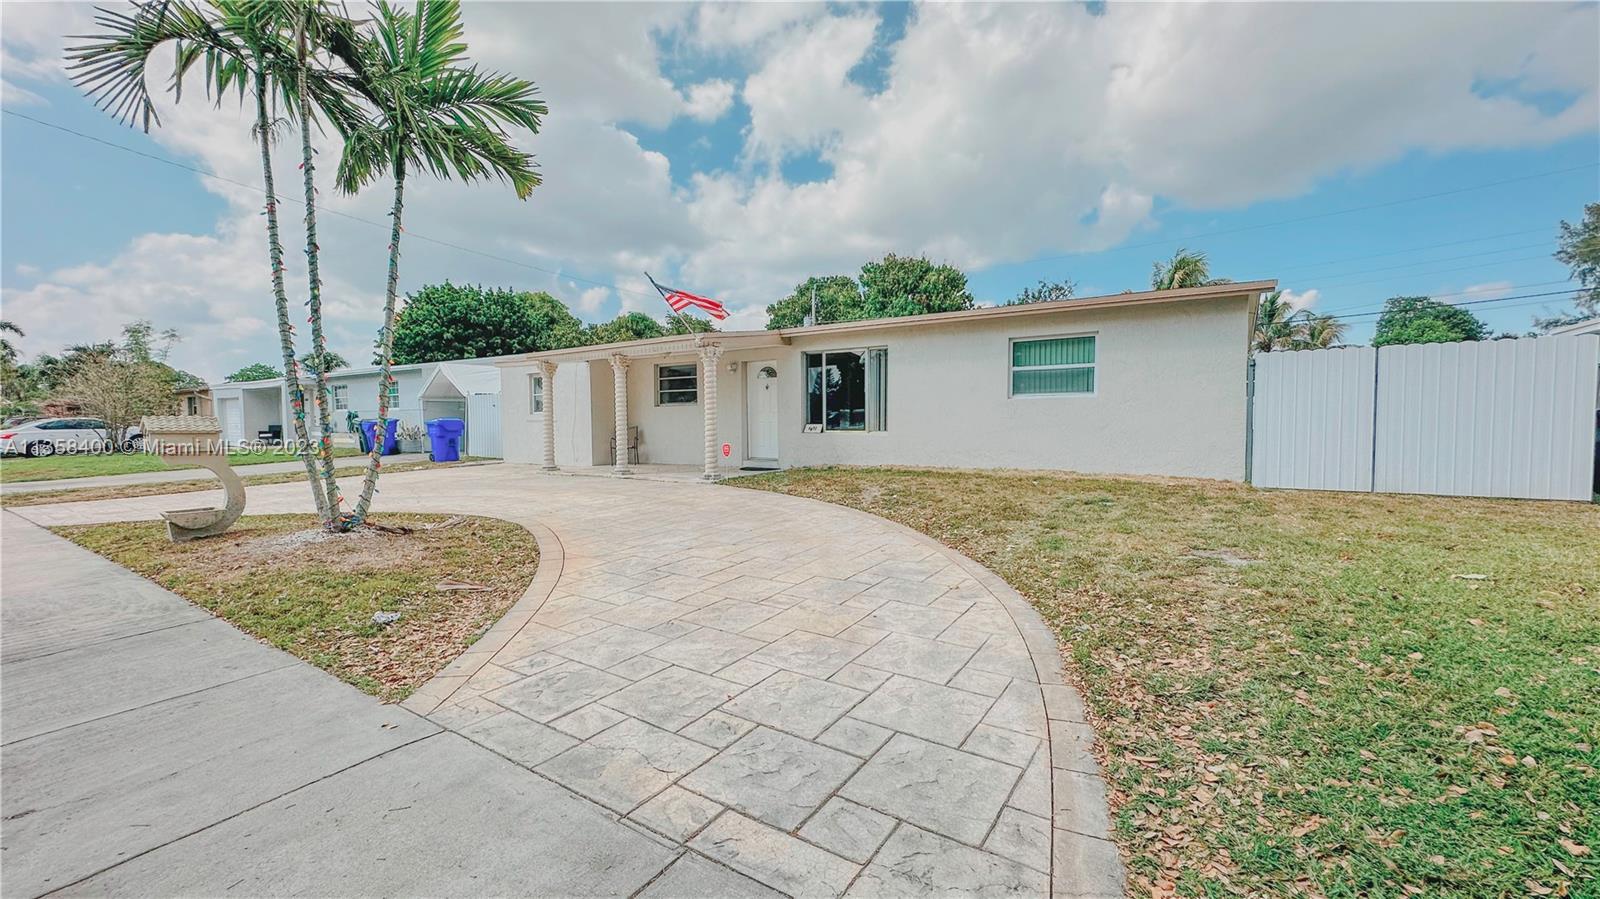 Looking for your dream home in Hollywood, FL? Look no further! This stunning 4-bedroom, 3-bathroom h